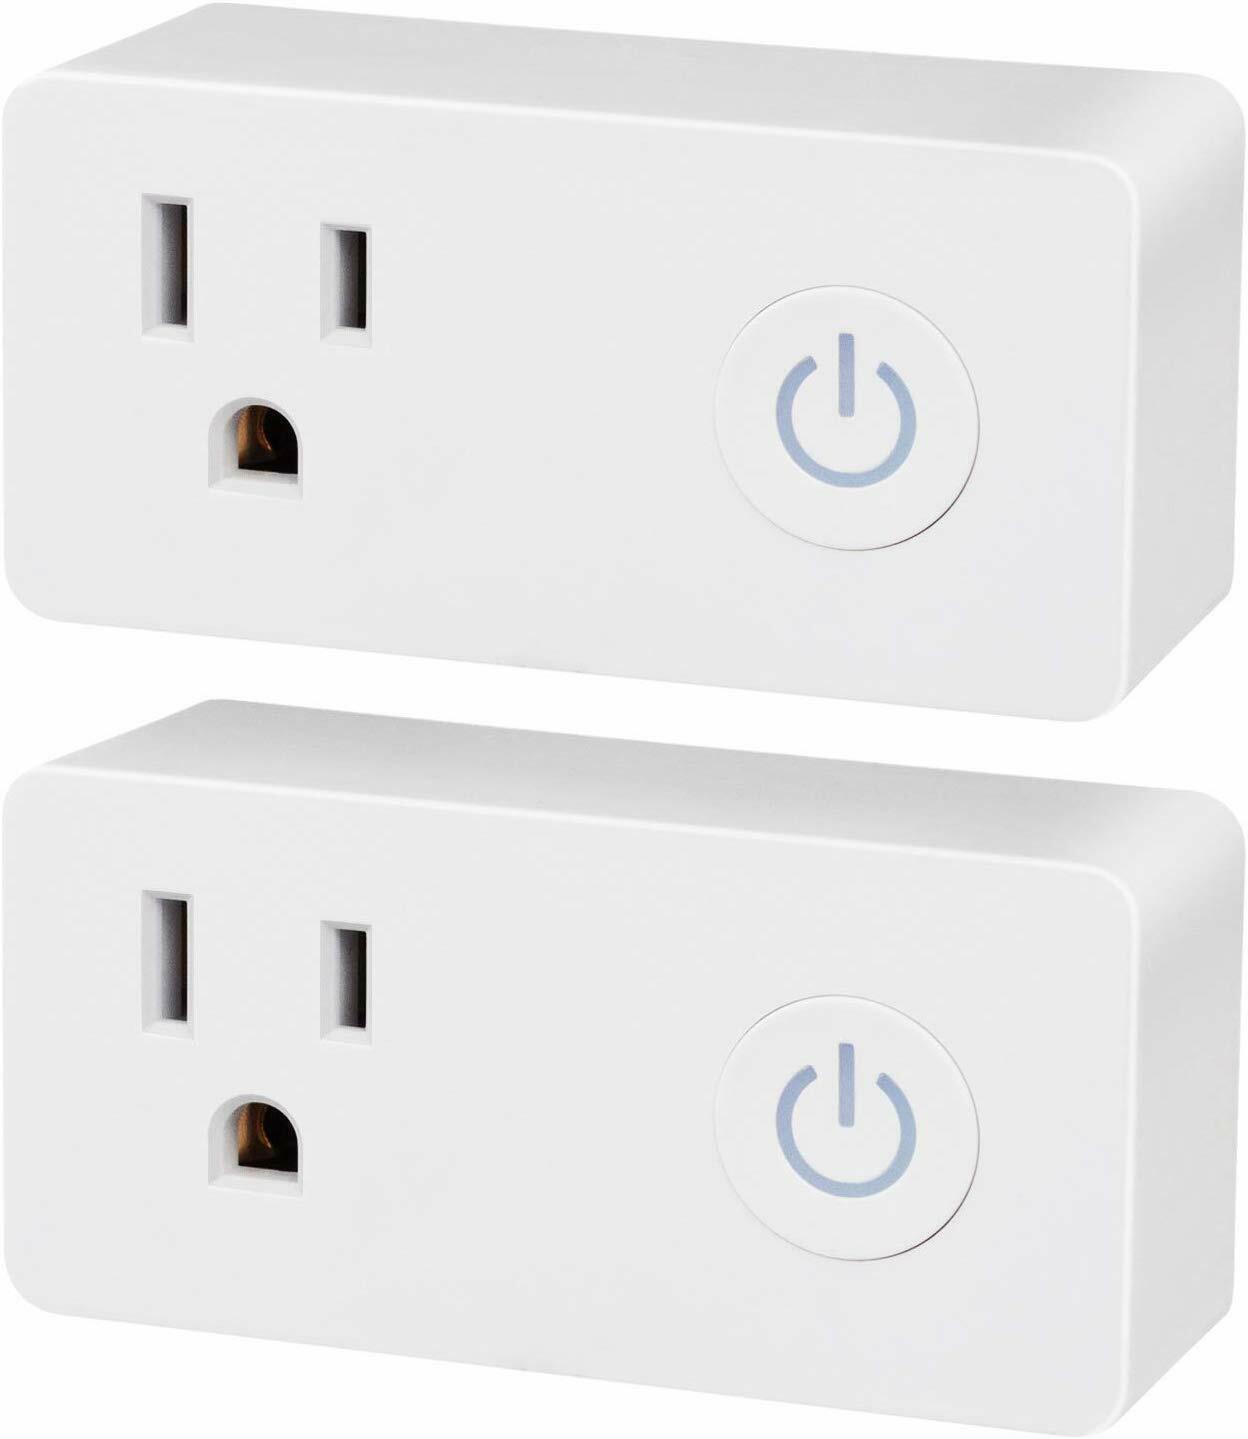 Bn-link Wi-fi Smart Plug Outlet Works With Alexa And Google Assistant- One Piece